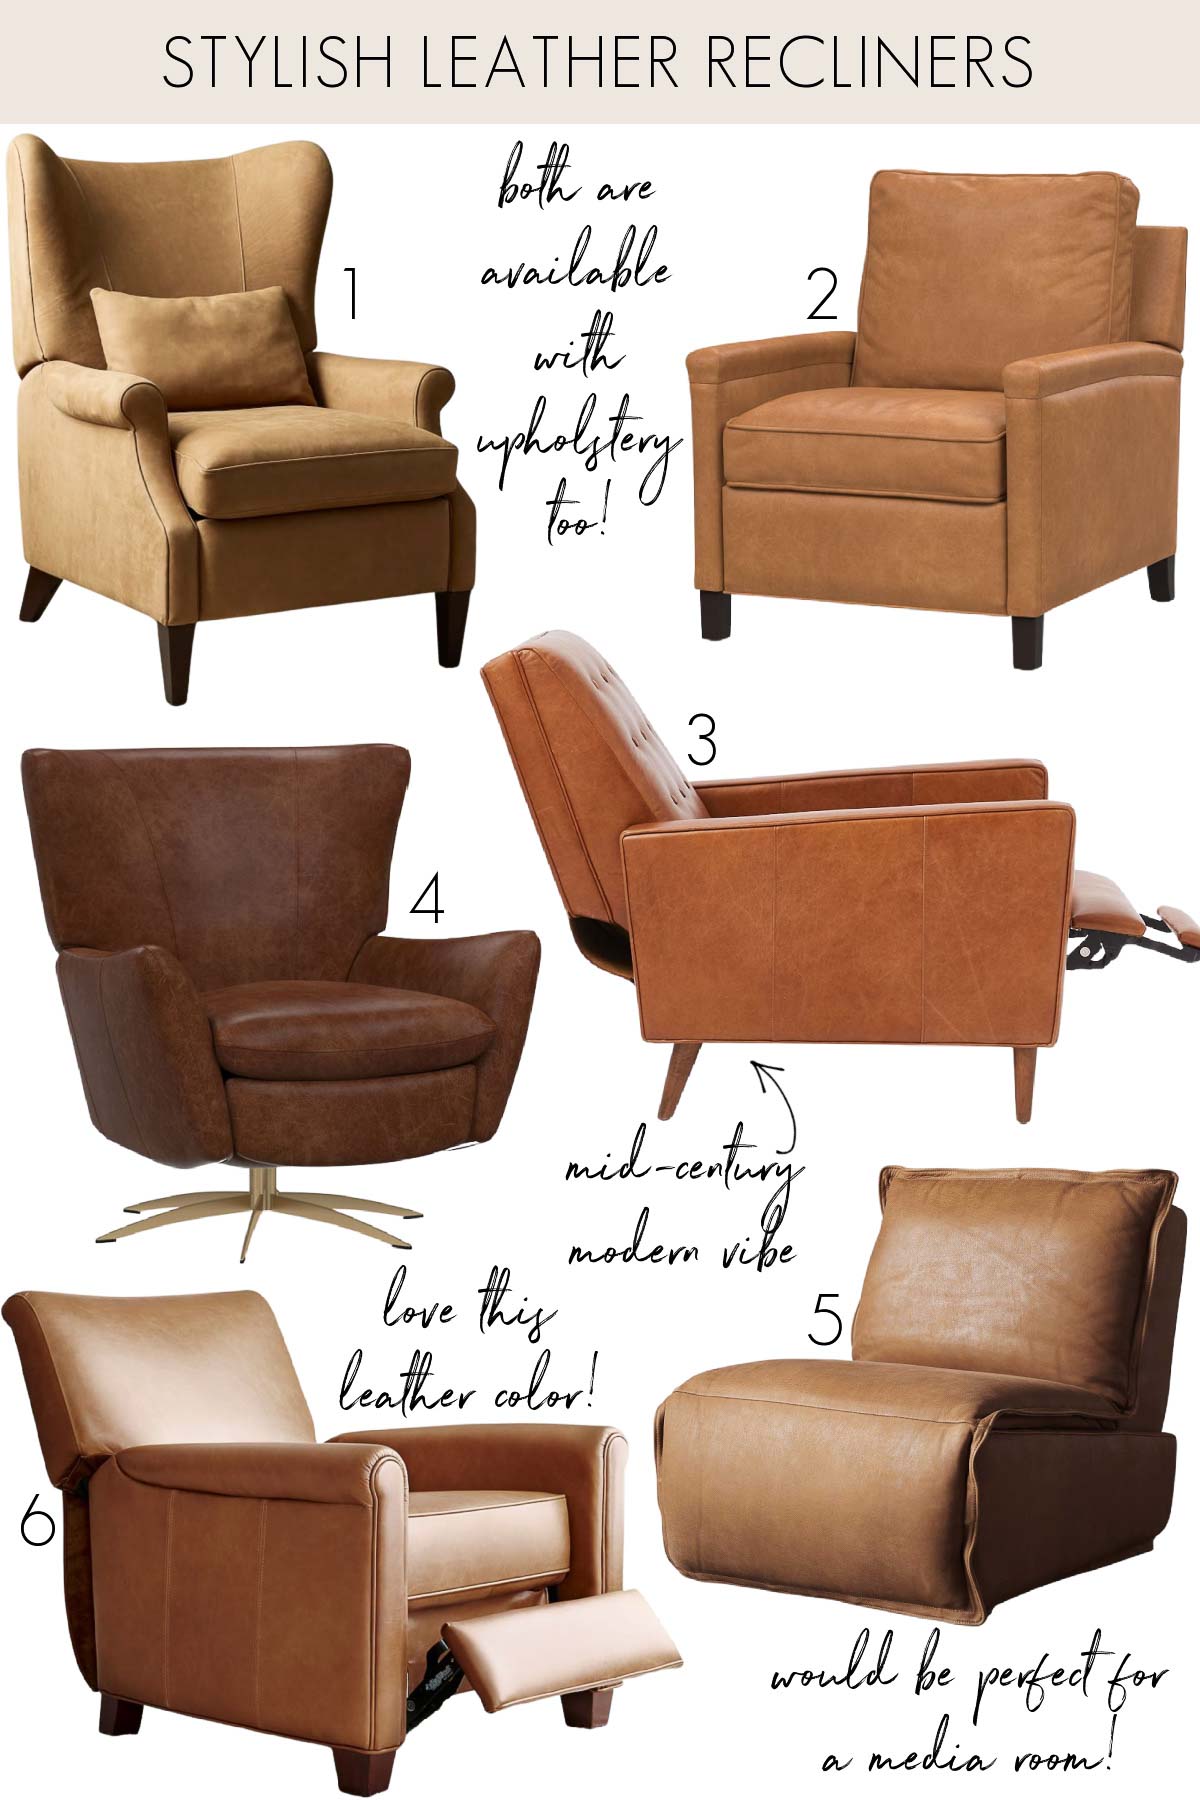 Collage of stylish leather recliners